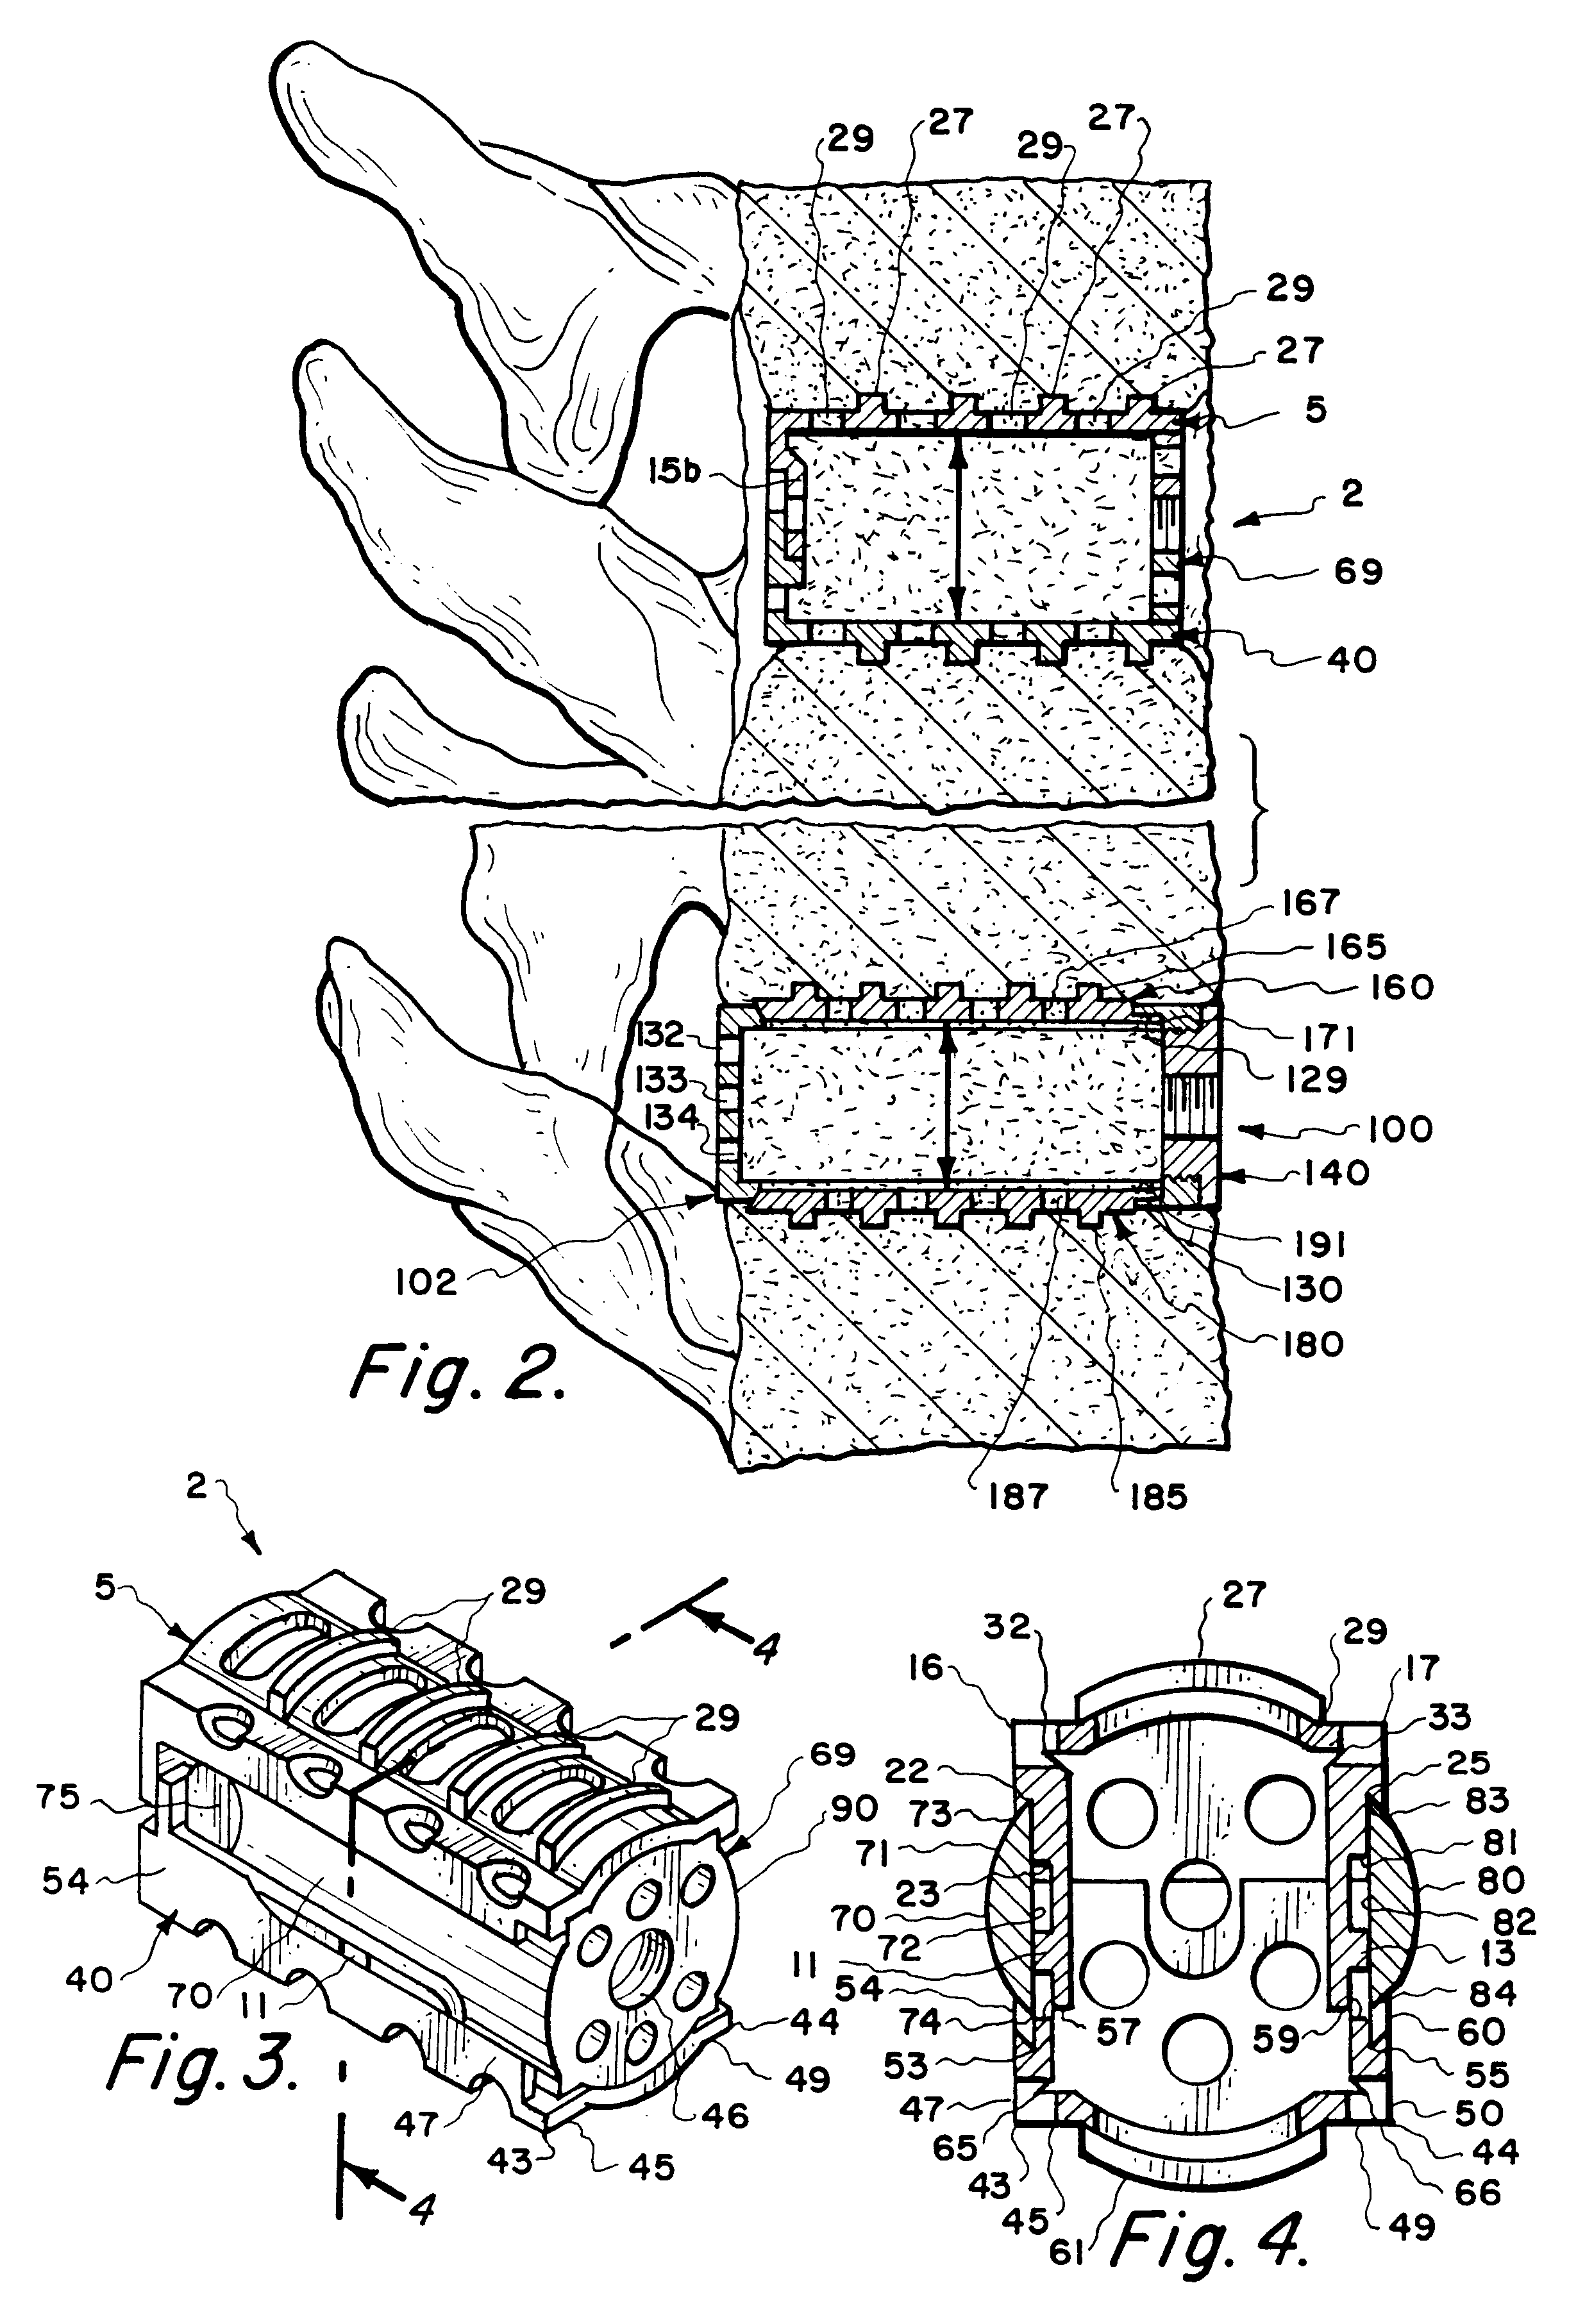 Expandable spinal implants